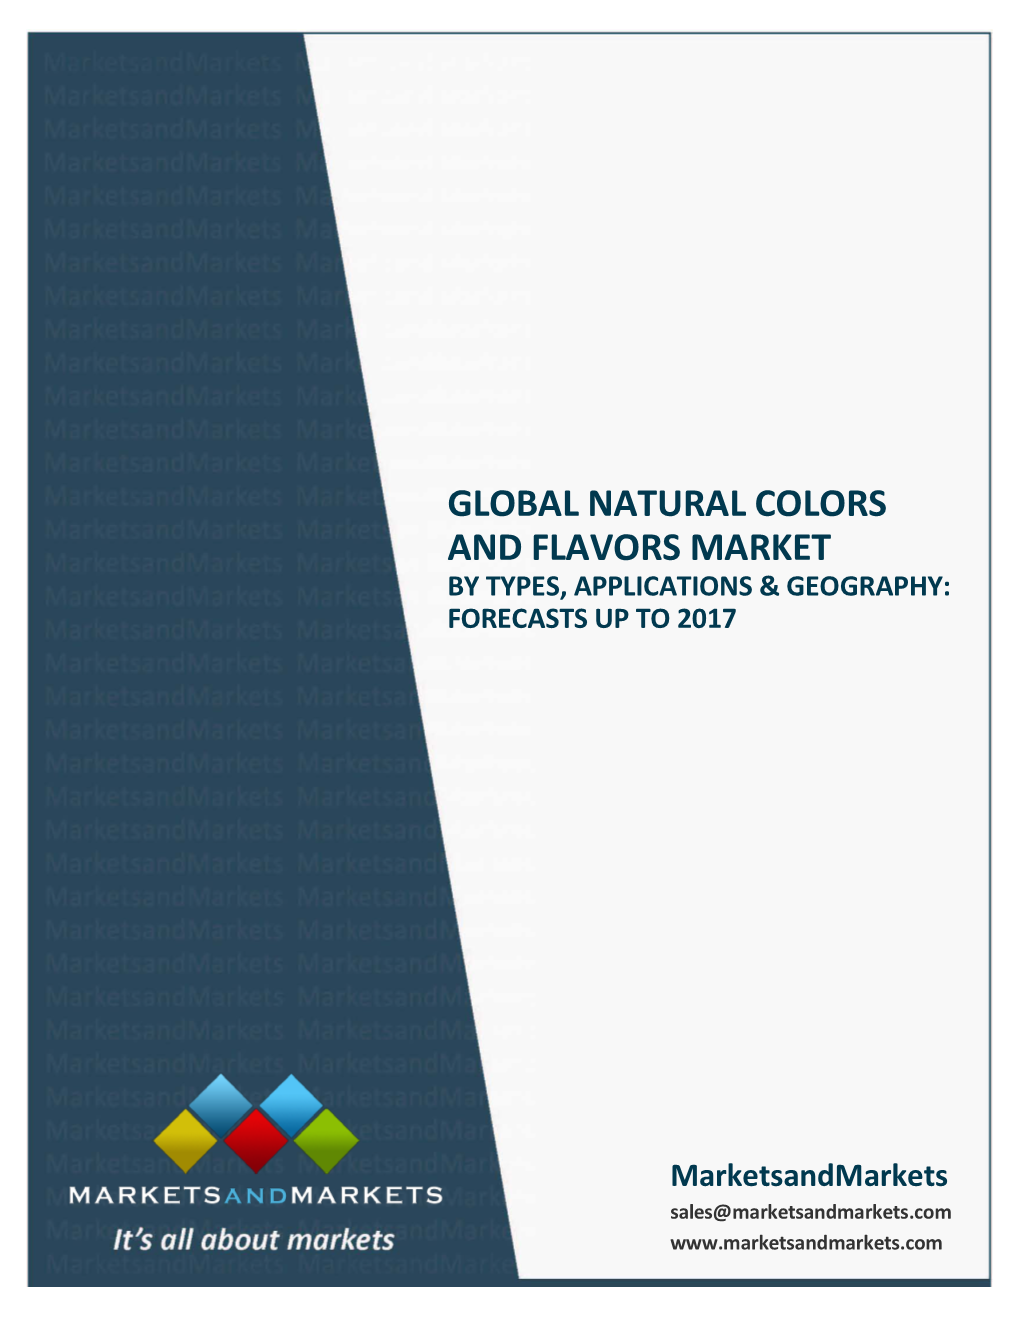 Global Natural Colors and Flavors Market by Types, Applications & Geography: Forecasts up to 2017